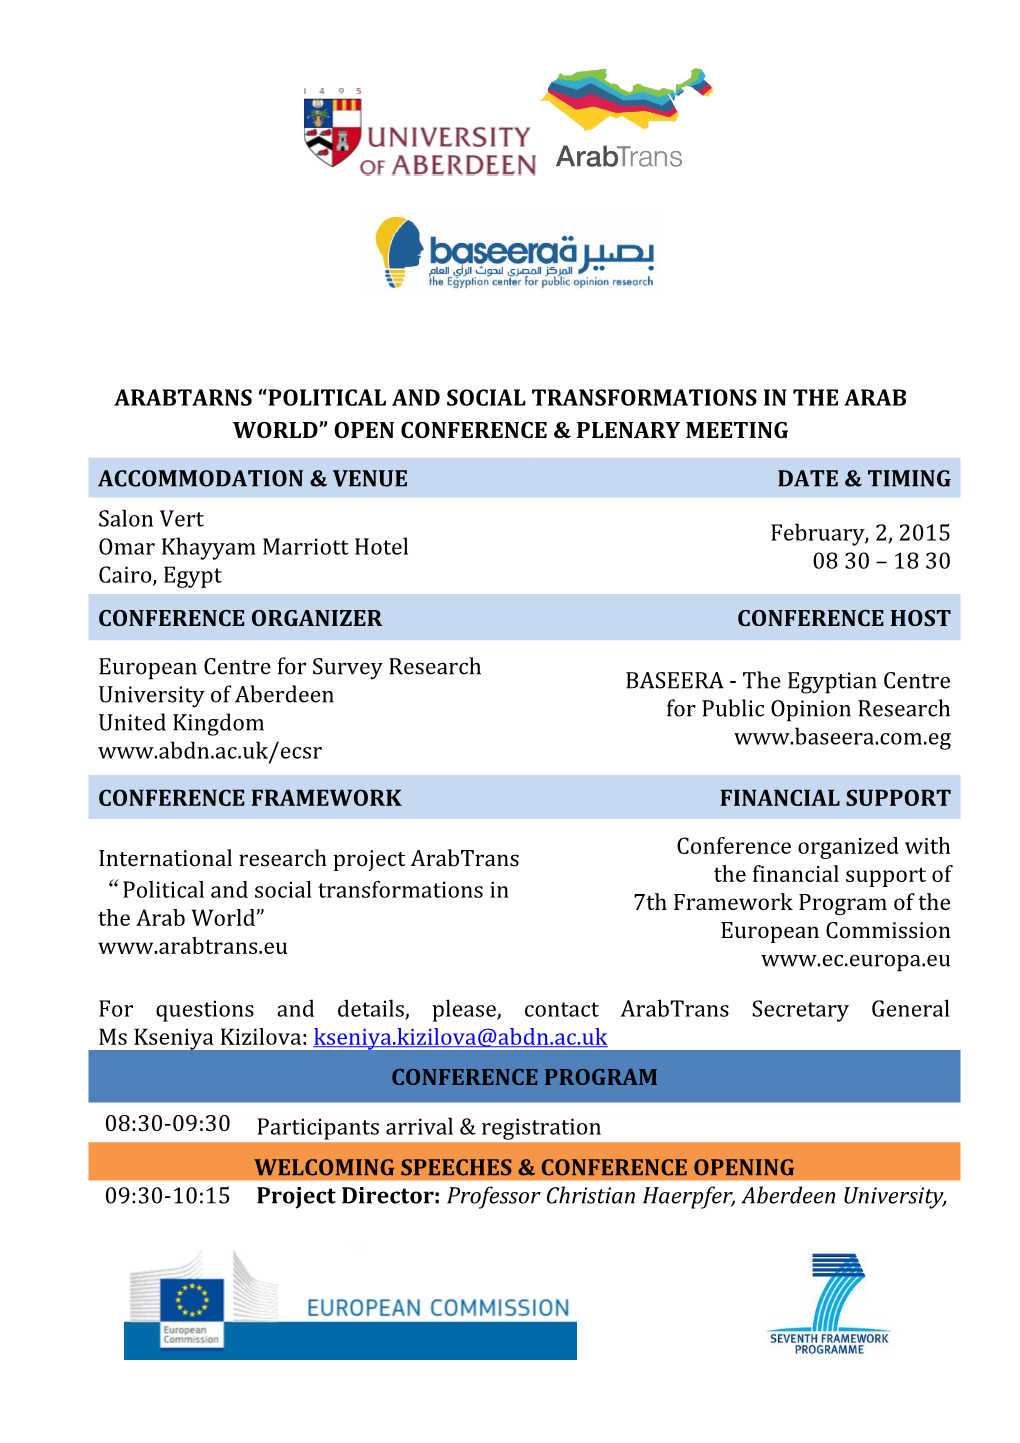 Arabtarns Political and Social Transformations in the Arab World Open Conference & Plenary